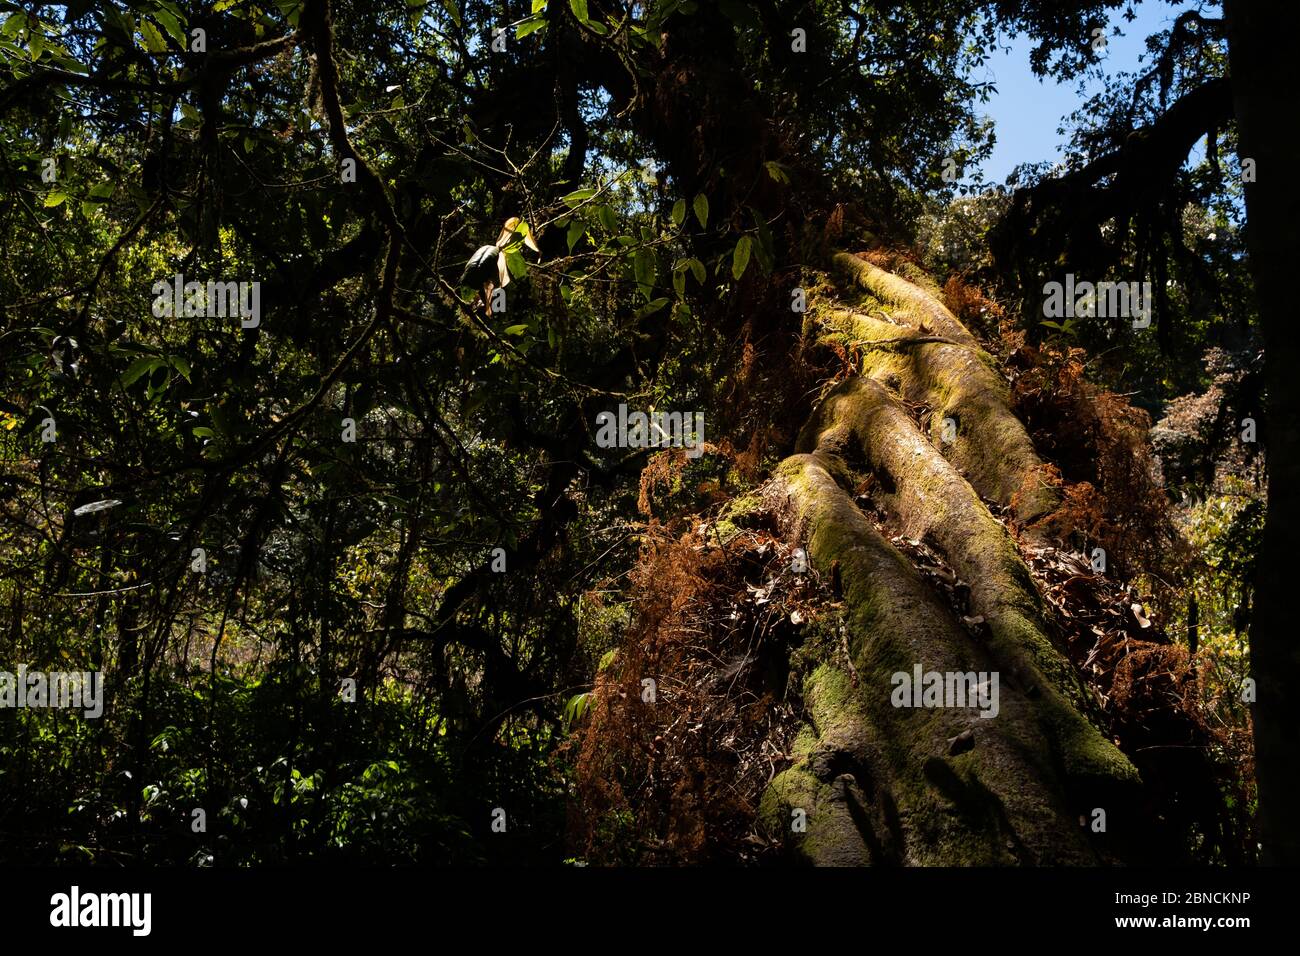 The large natural tree in Doi Inthanon national park in Chiang Mai, Thailand Stock Photo